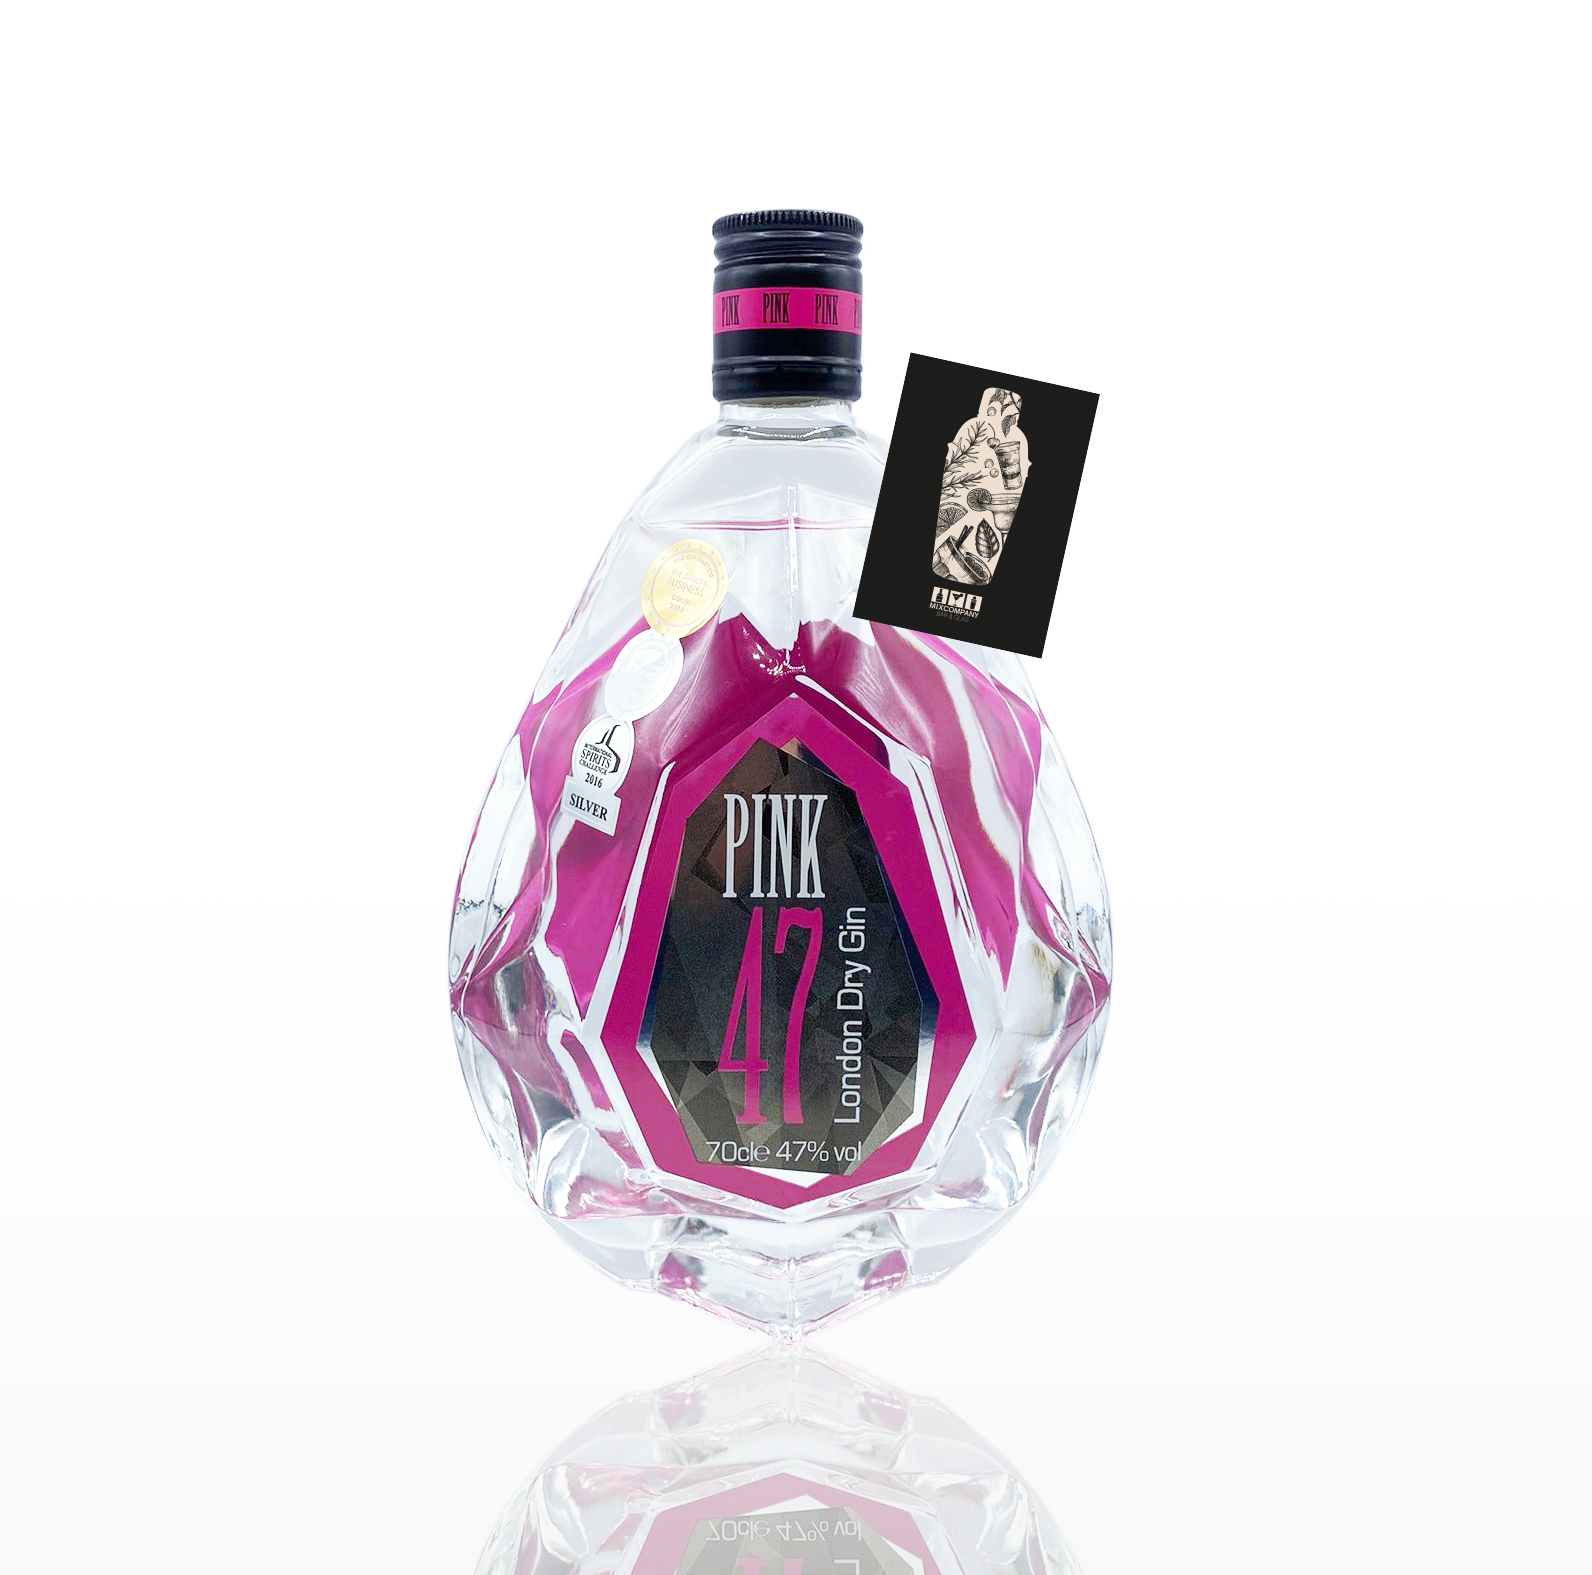 Pink 47 London Dry Gin 70cl (47% vol.)- [Enthält Sulfite]